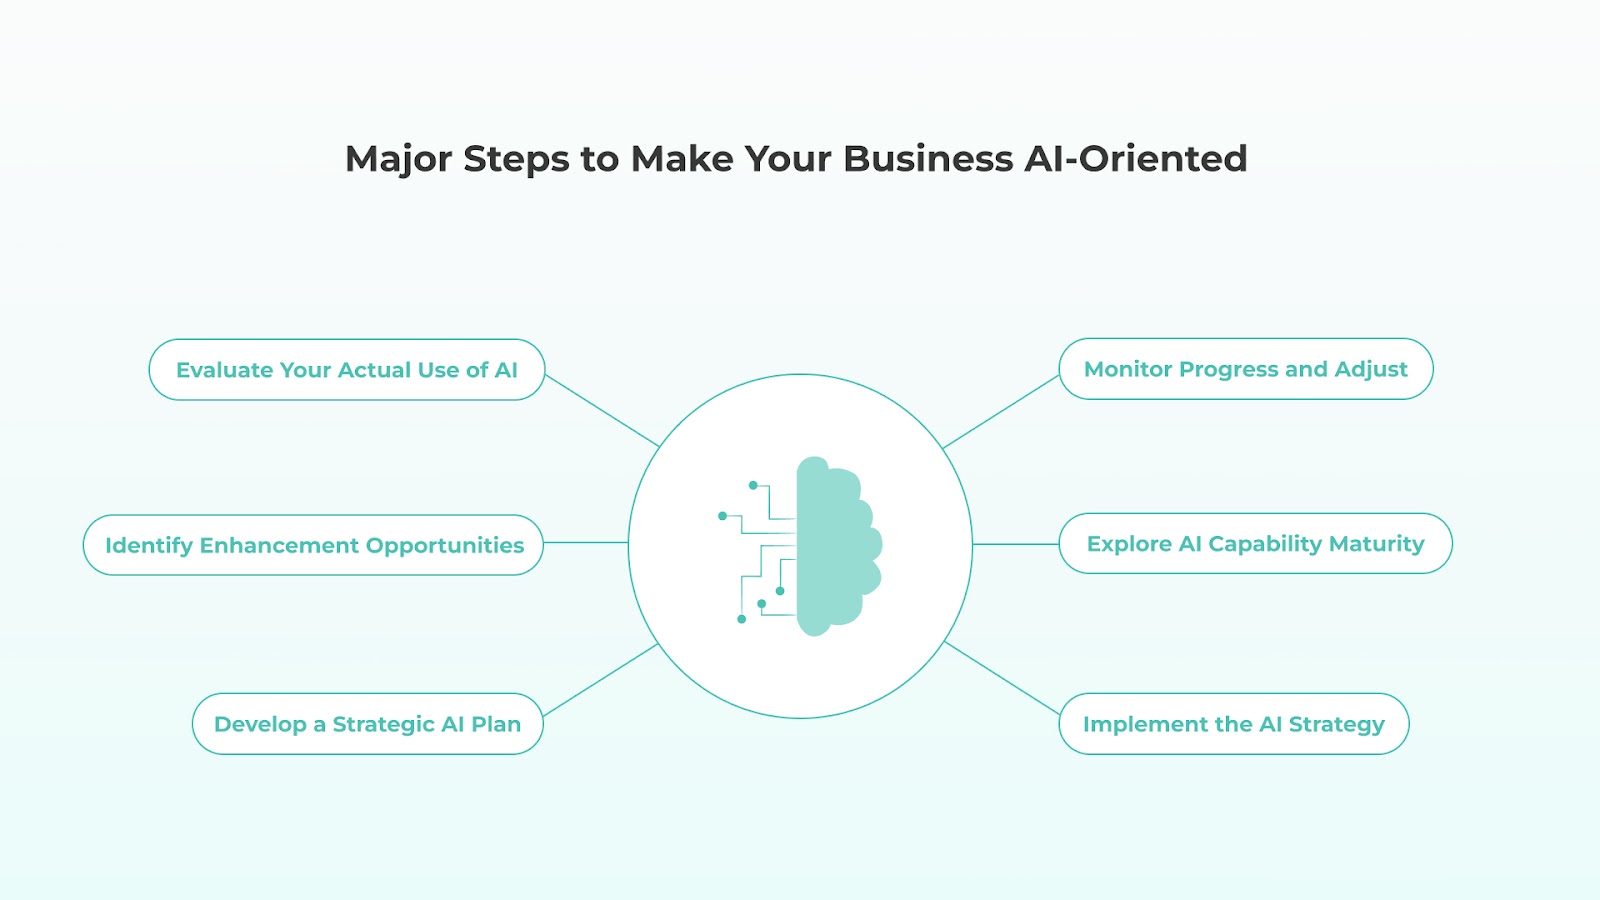 Major Steps to Make Your Business AI-Oriented